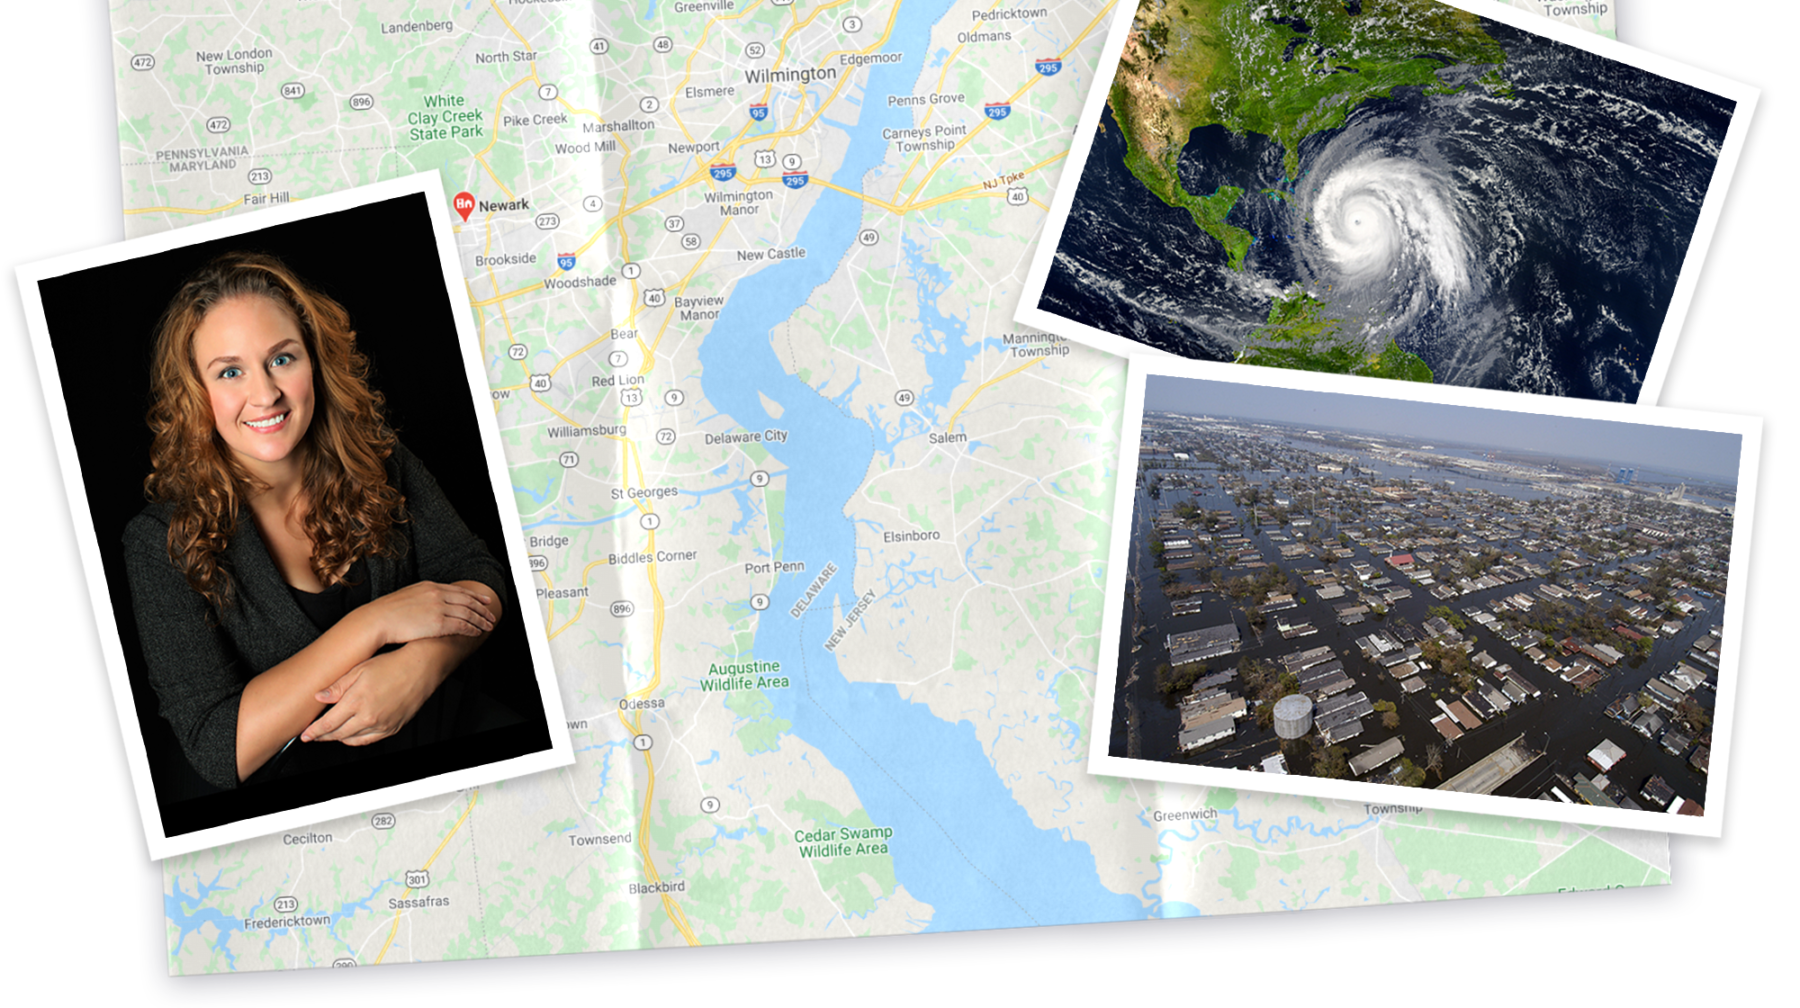 Collage of map of Delaware, satellite image of a hurricane, image of flooded houses, and image of A.R.Siders